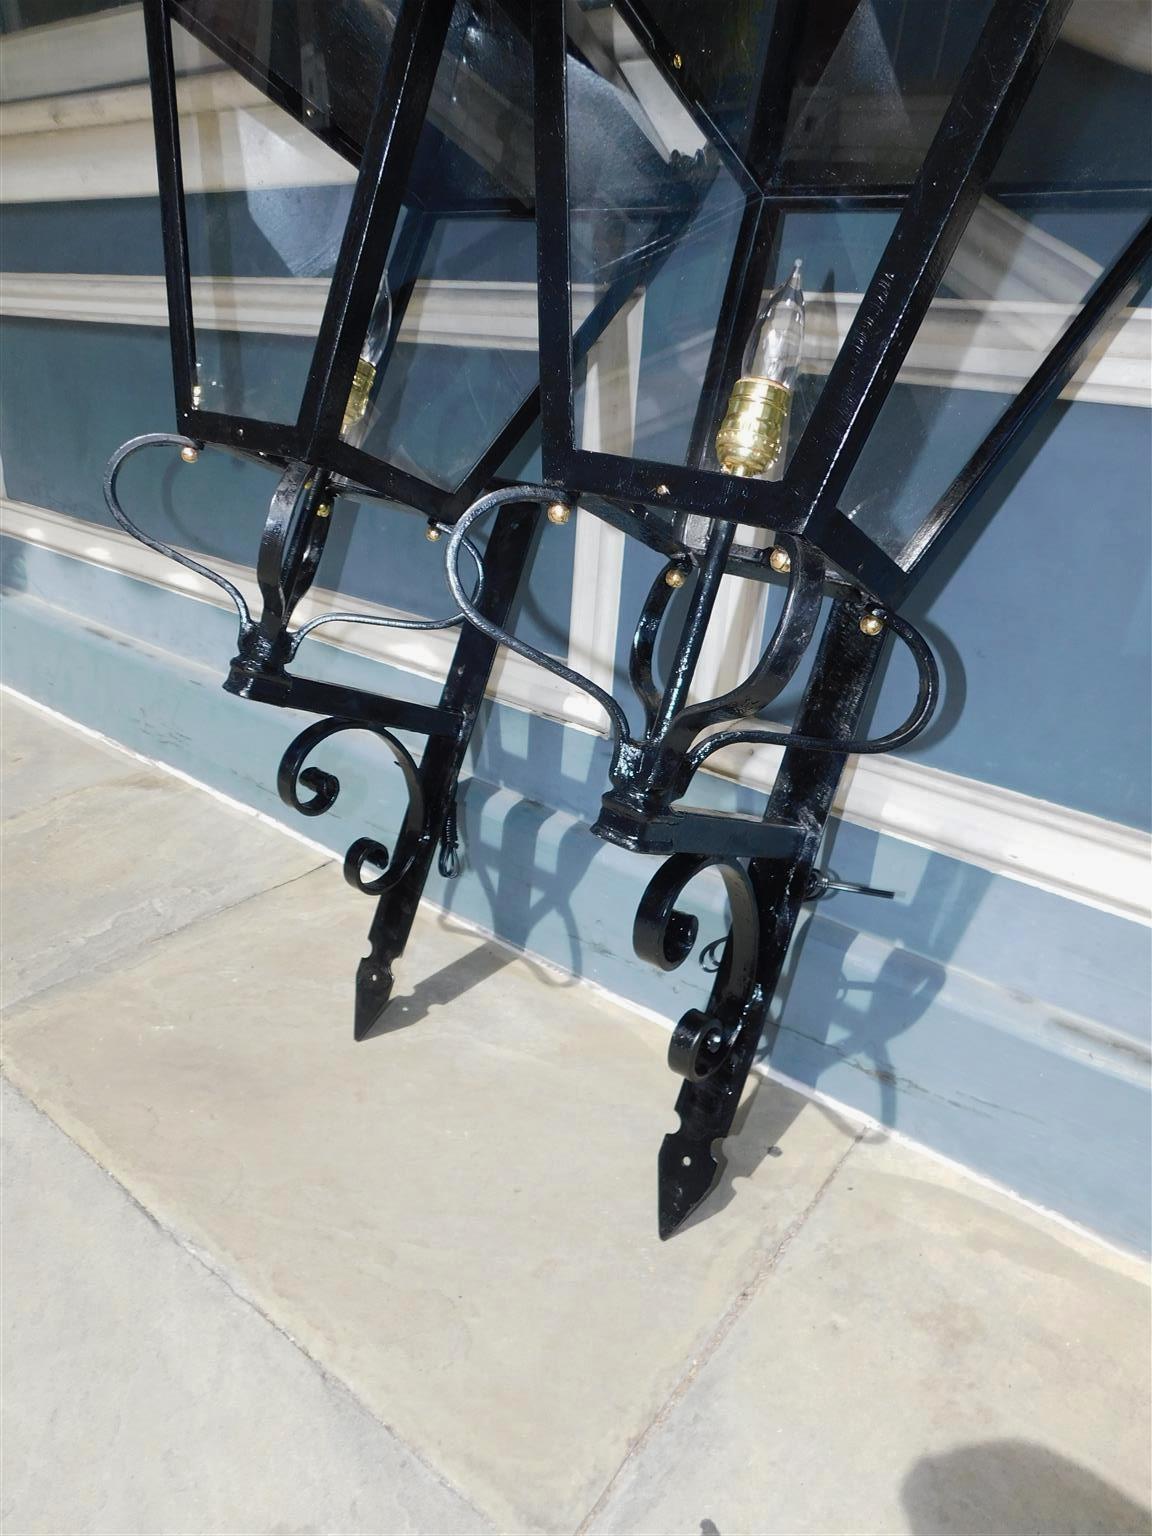 Mid-19th Century Pair of American Wrought Iron and Spelter Finial Mounted Wall Lanterns, C. 1850 For Sale